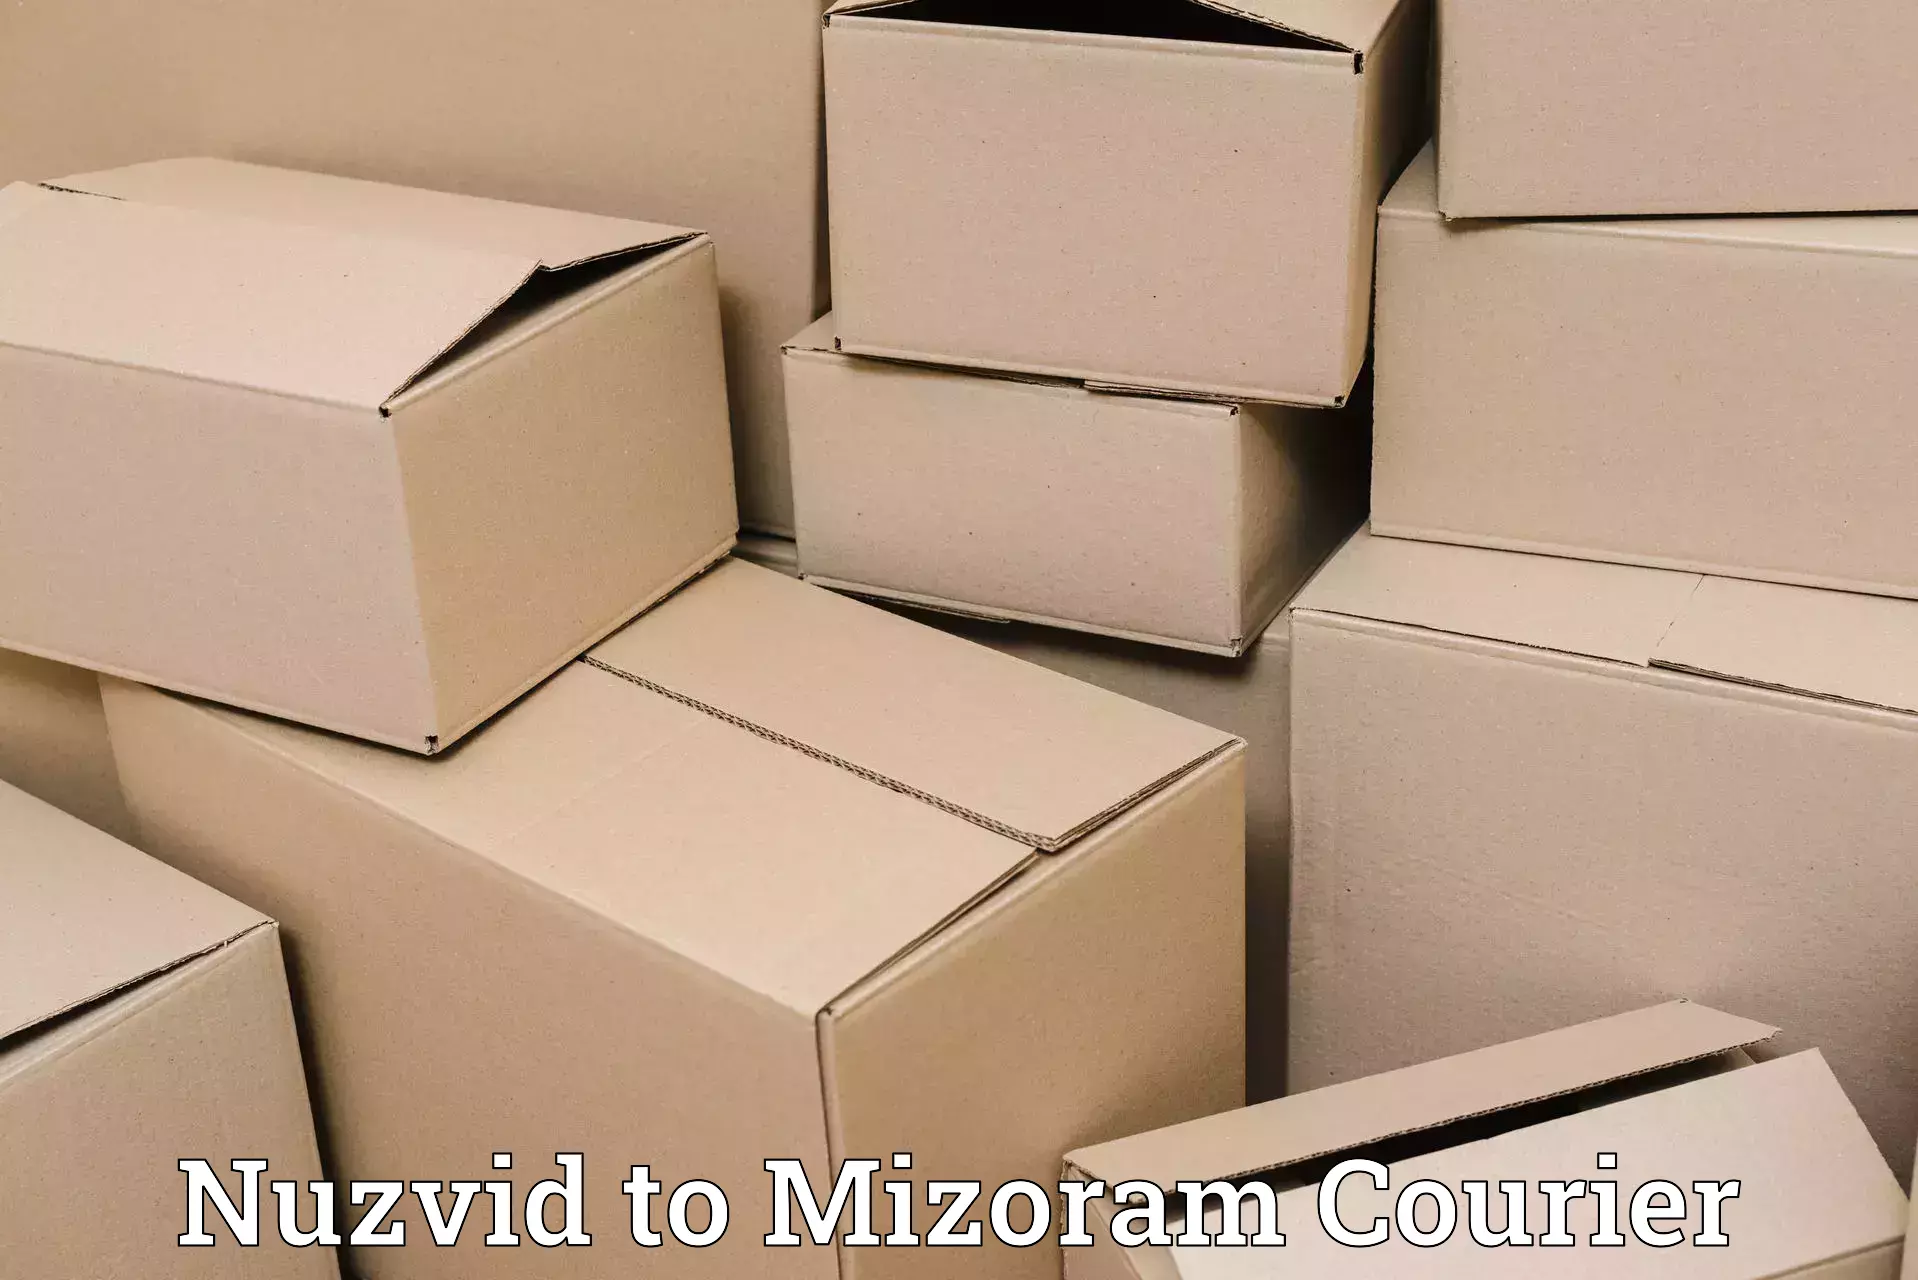 Modern delivery technologies in Nuzvid to Aizawl